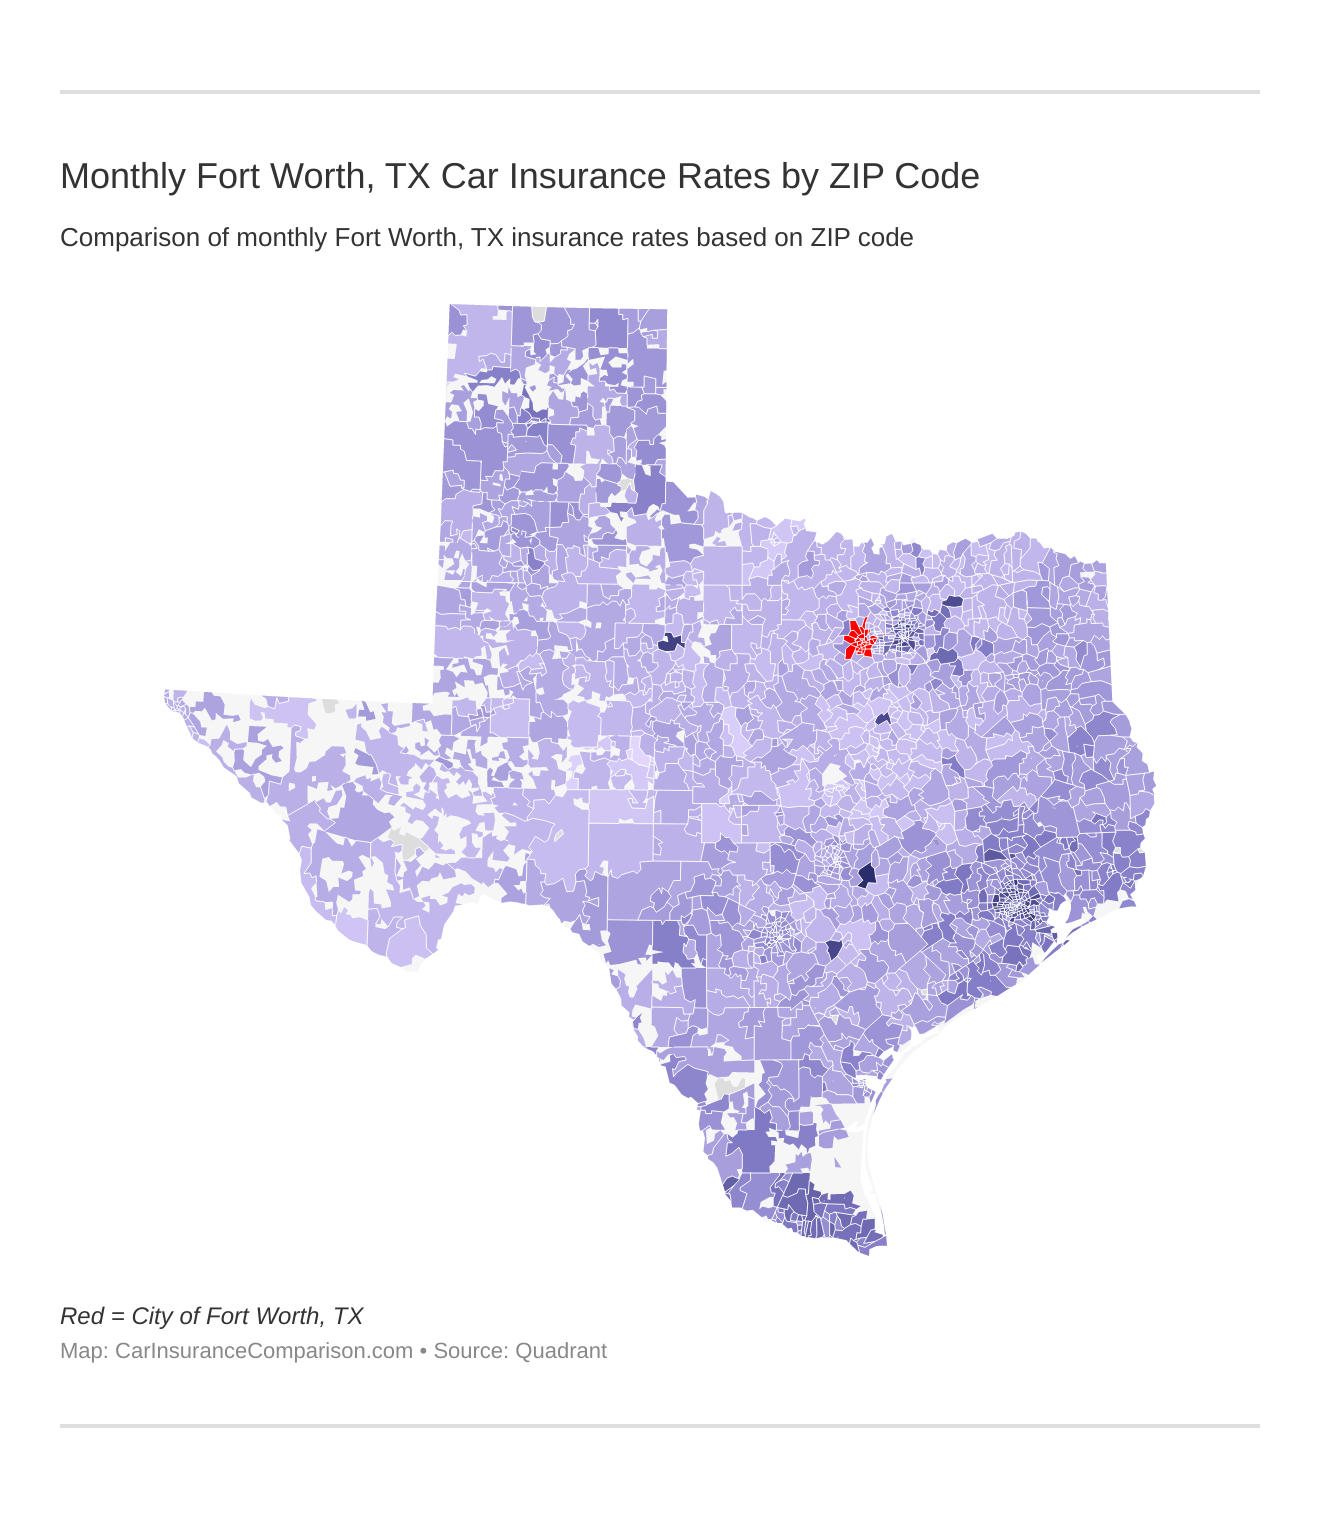 Monthly Fort Worth, TX Car Insurance Rates by ZIP Code